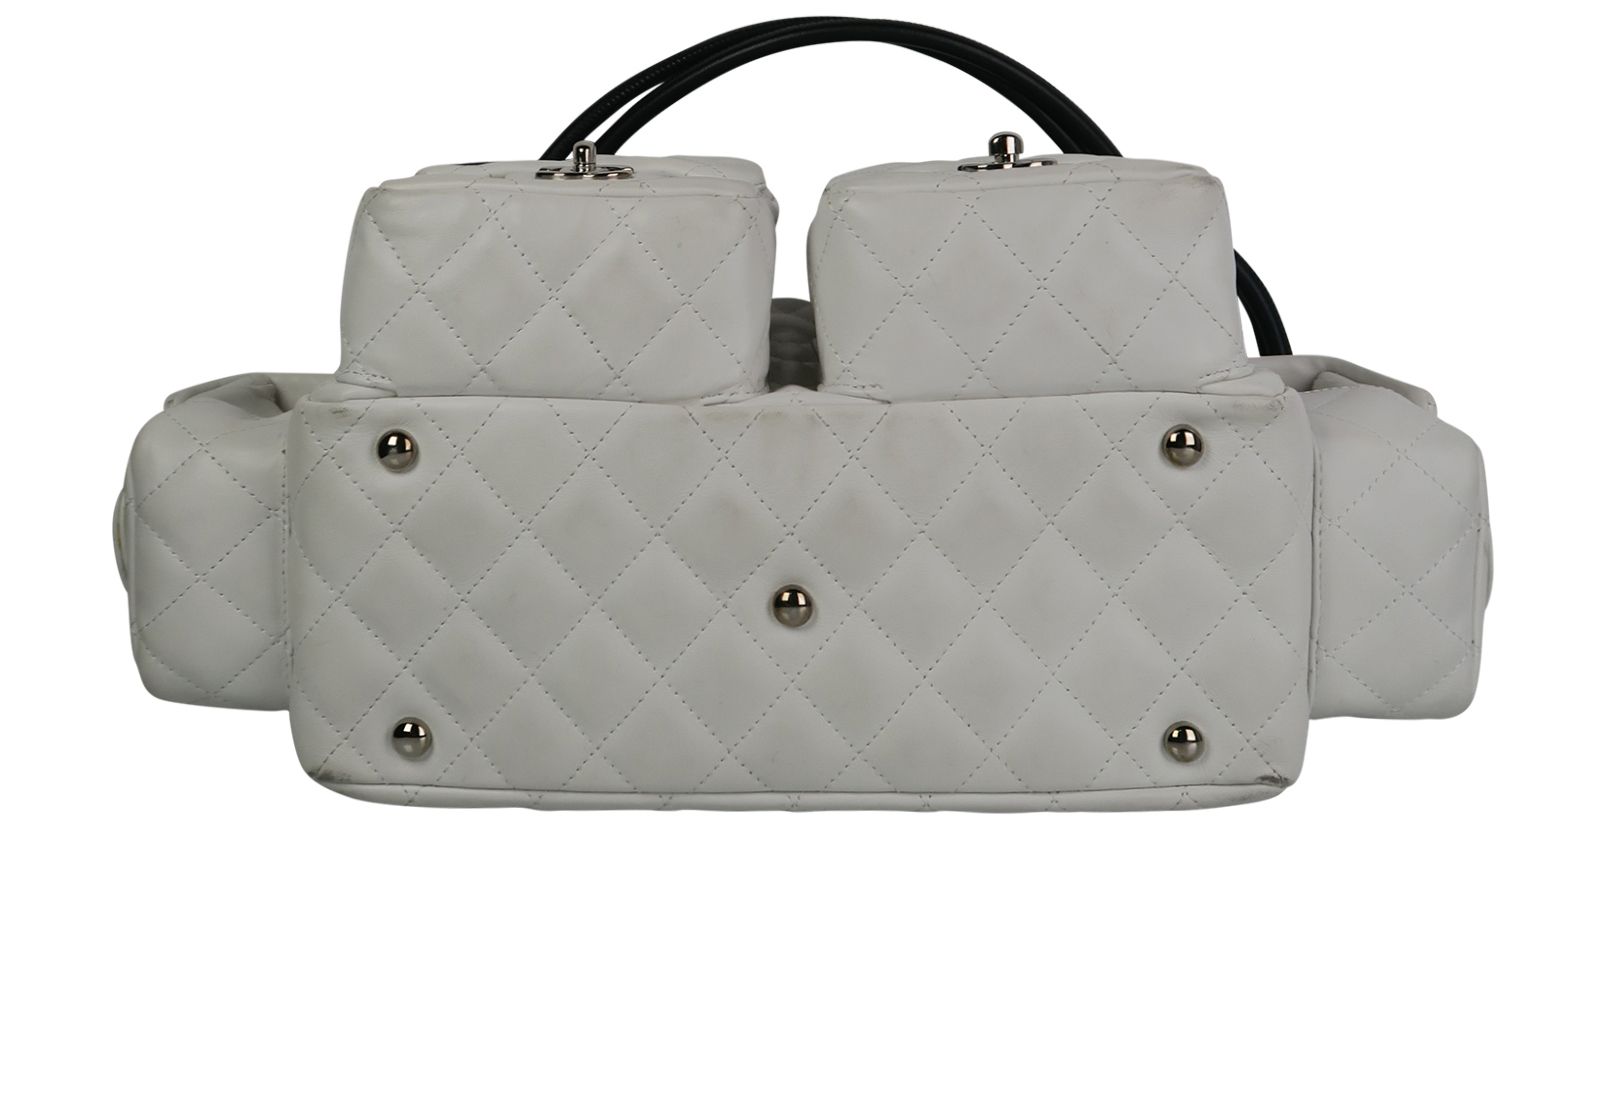 Chanel Grand Reporter Cambon - ShopStyle Shoulder Bags